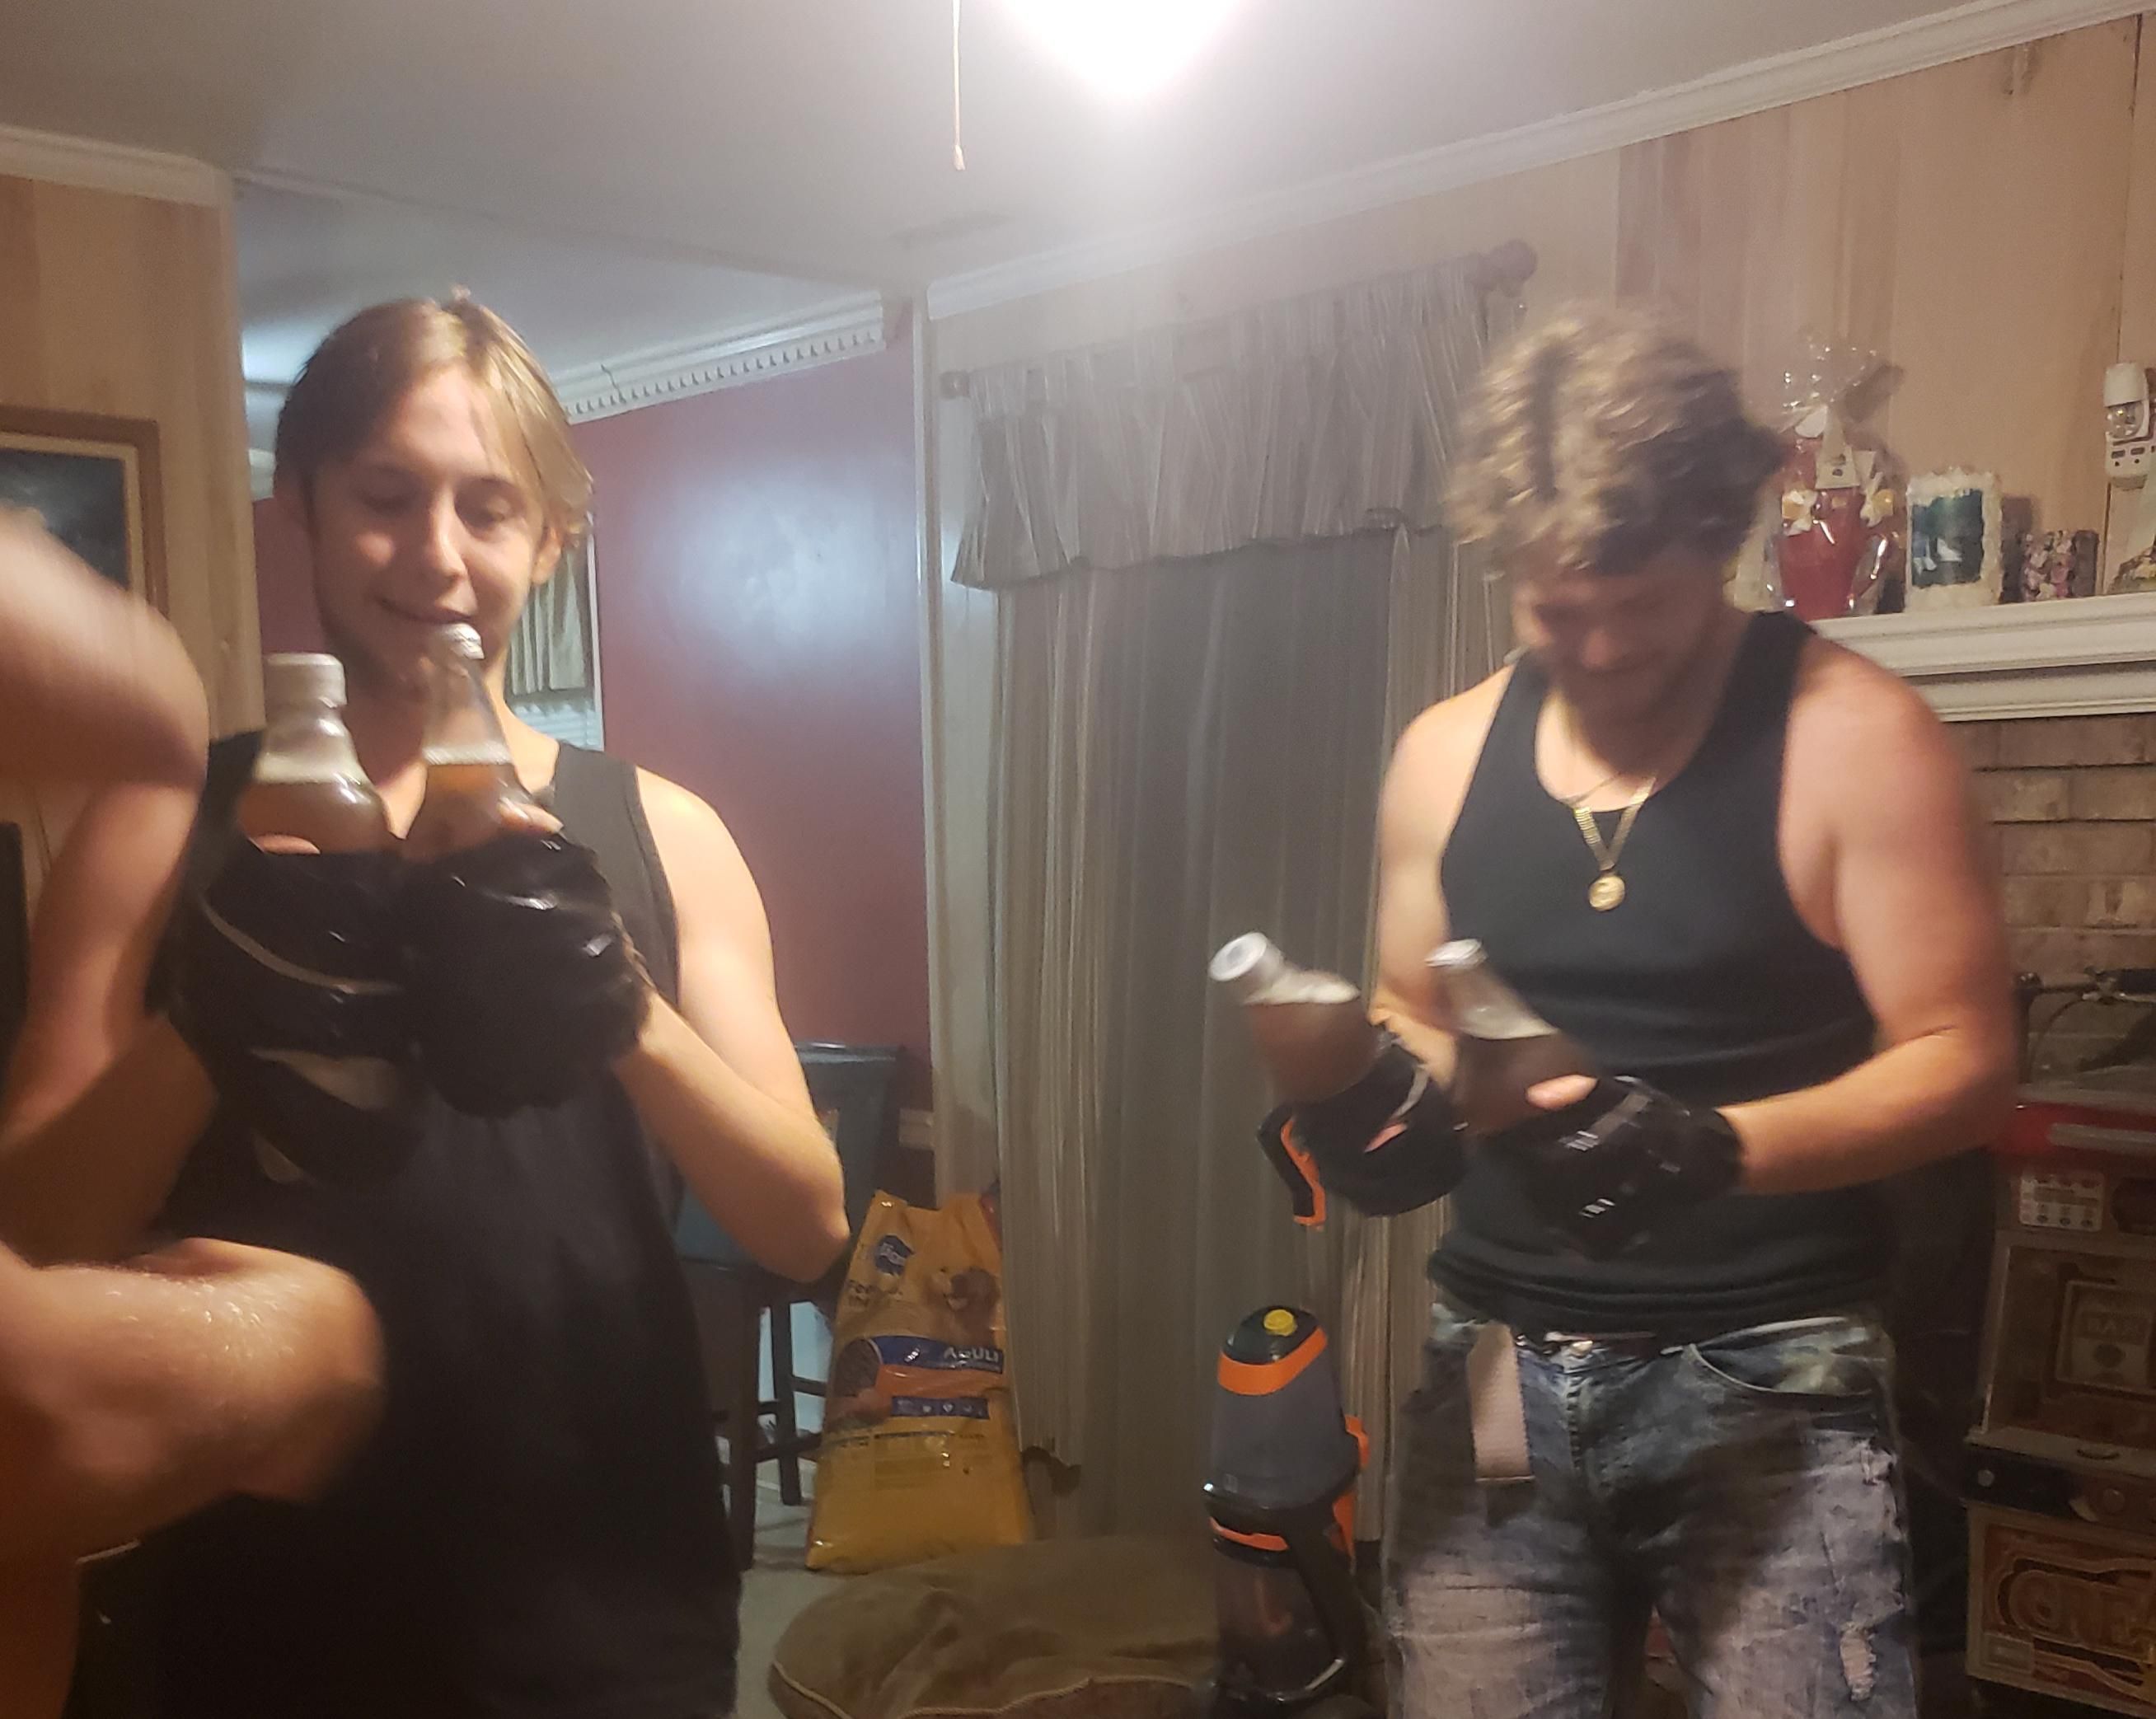 Soo my bf and I convinced his baby cousin and friend home from college to do Edward 40hands . Poor kids havent heard of it . They seem so full of hope .